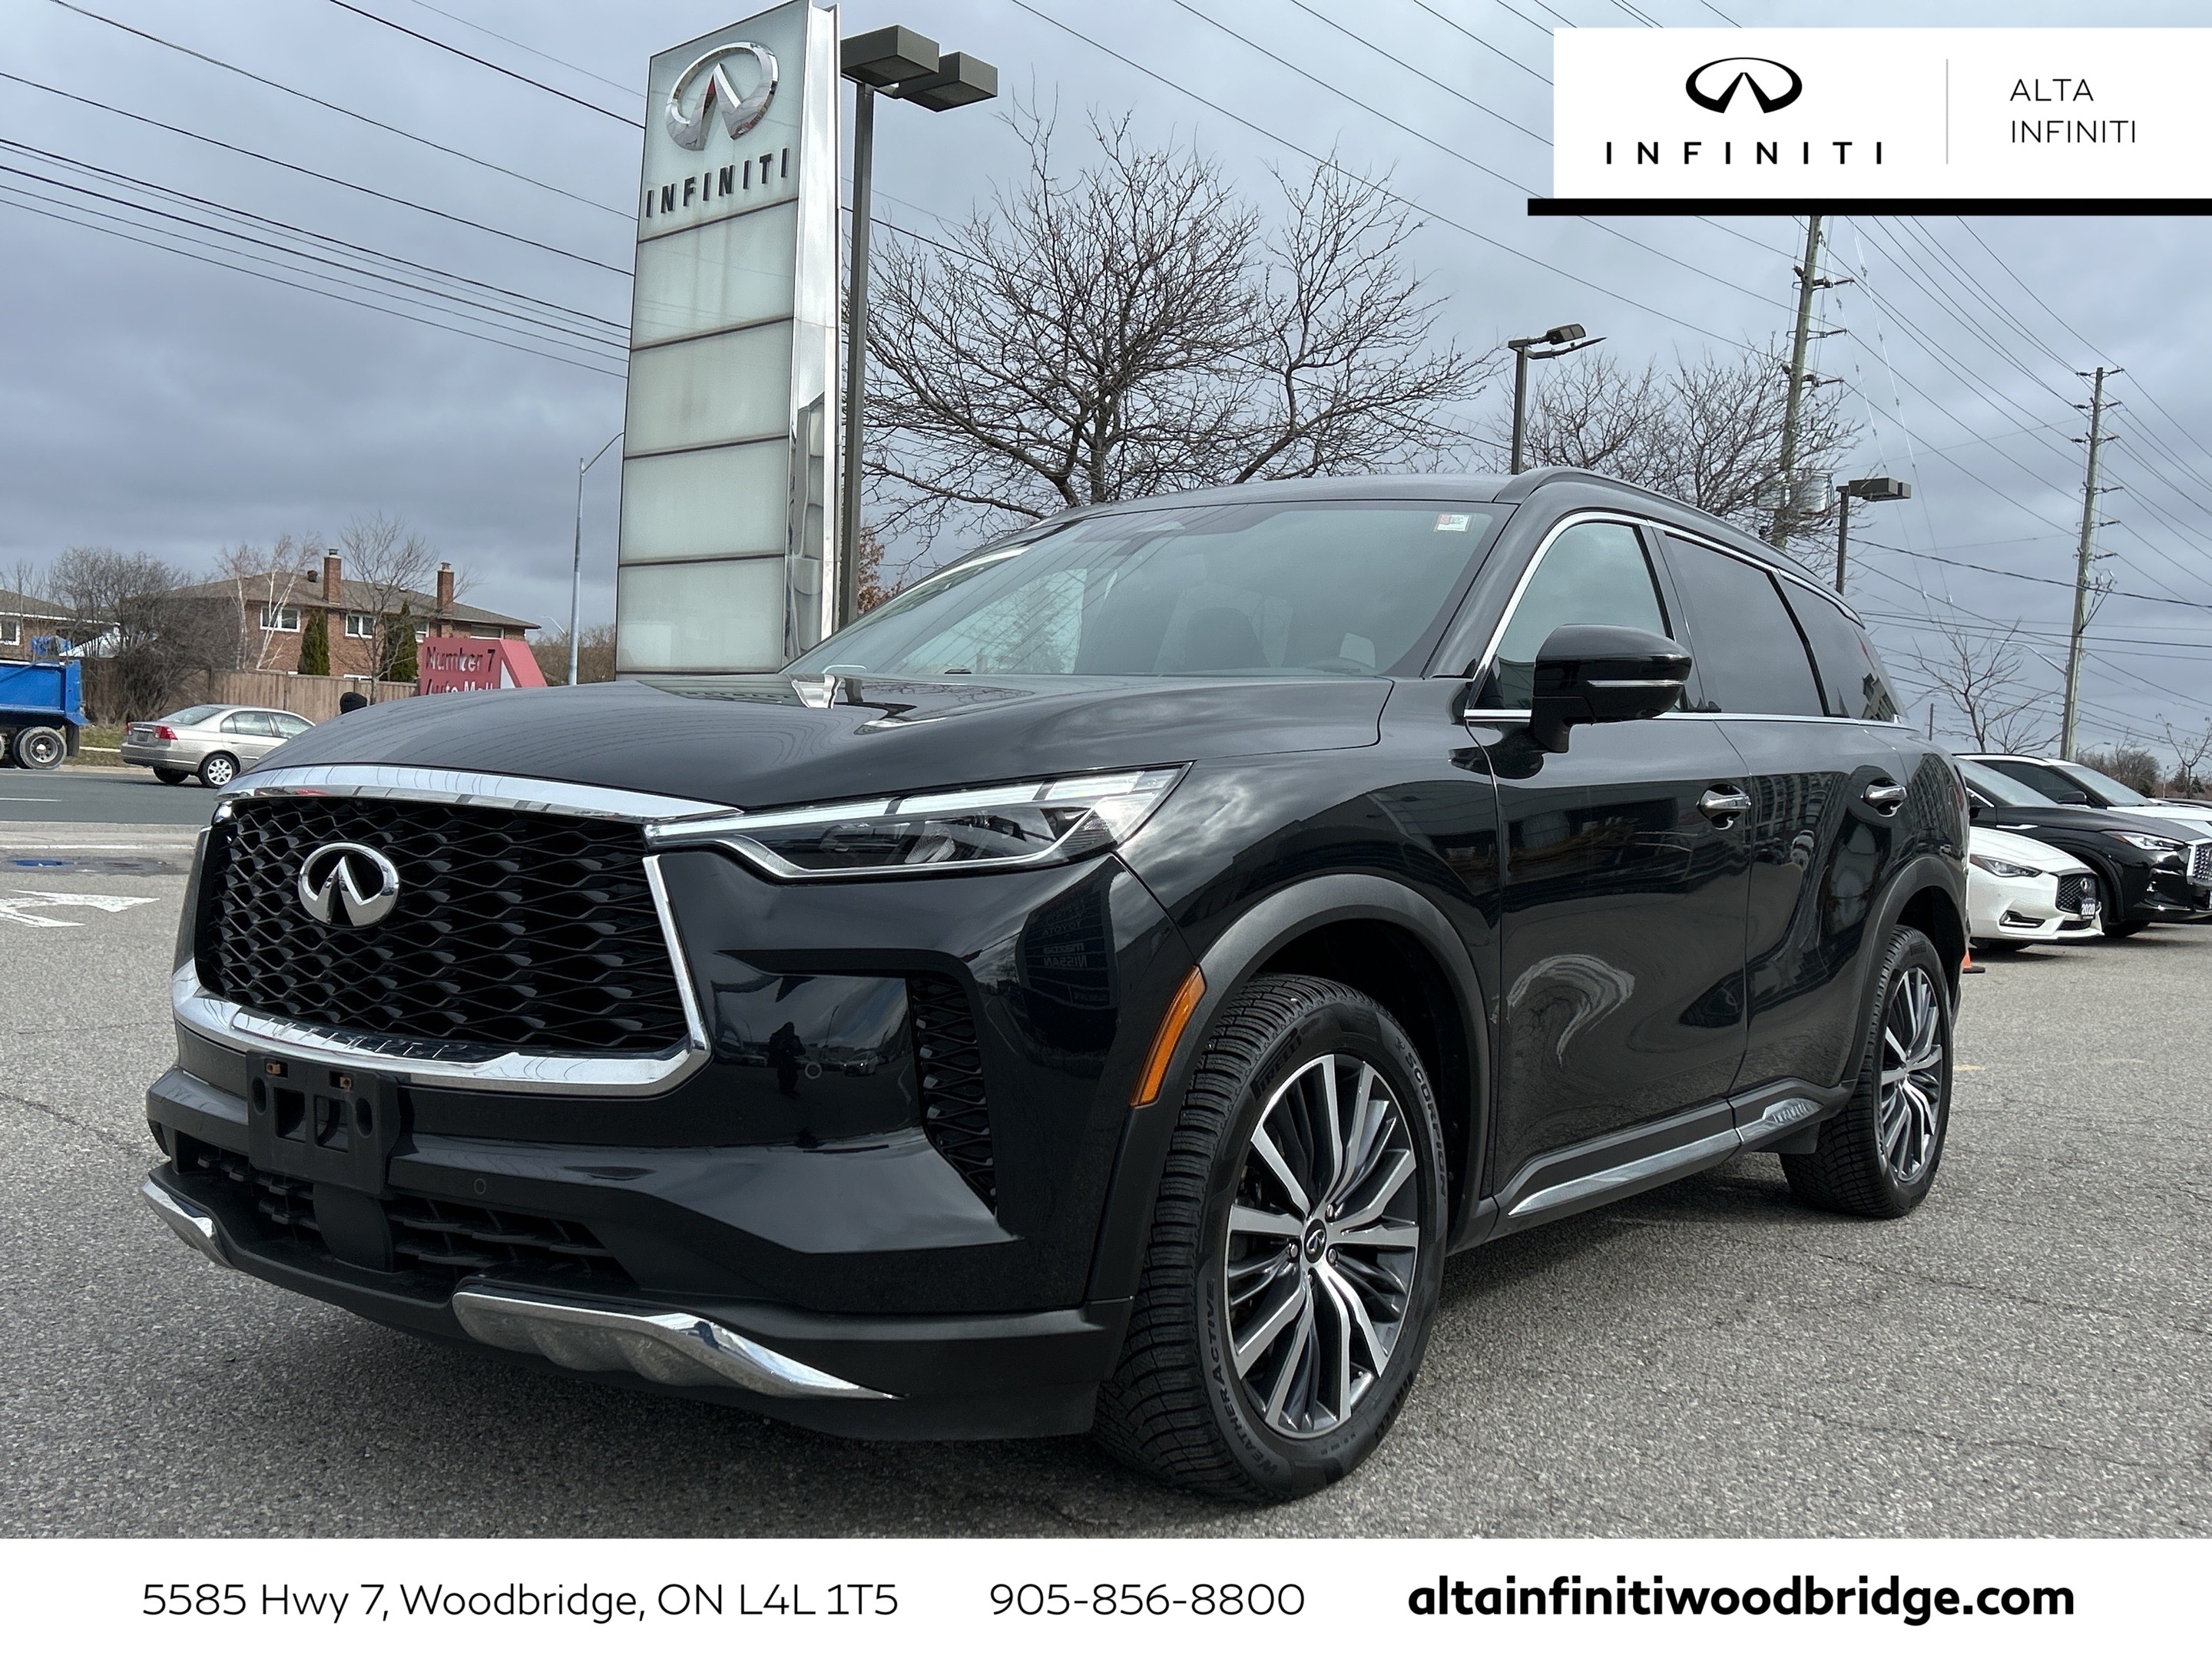 2022 Infiniti QX60 ONE OWNER / MASSAGE SEATS / HEADS UP DISPLAY